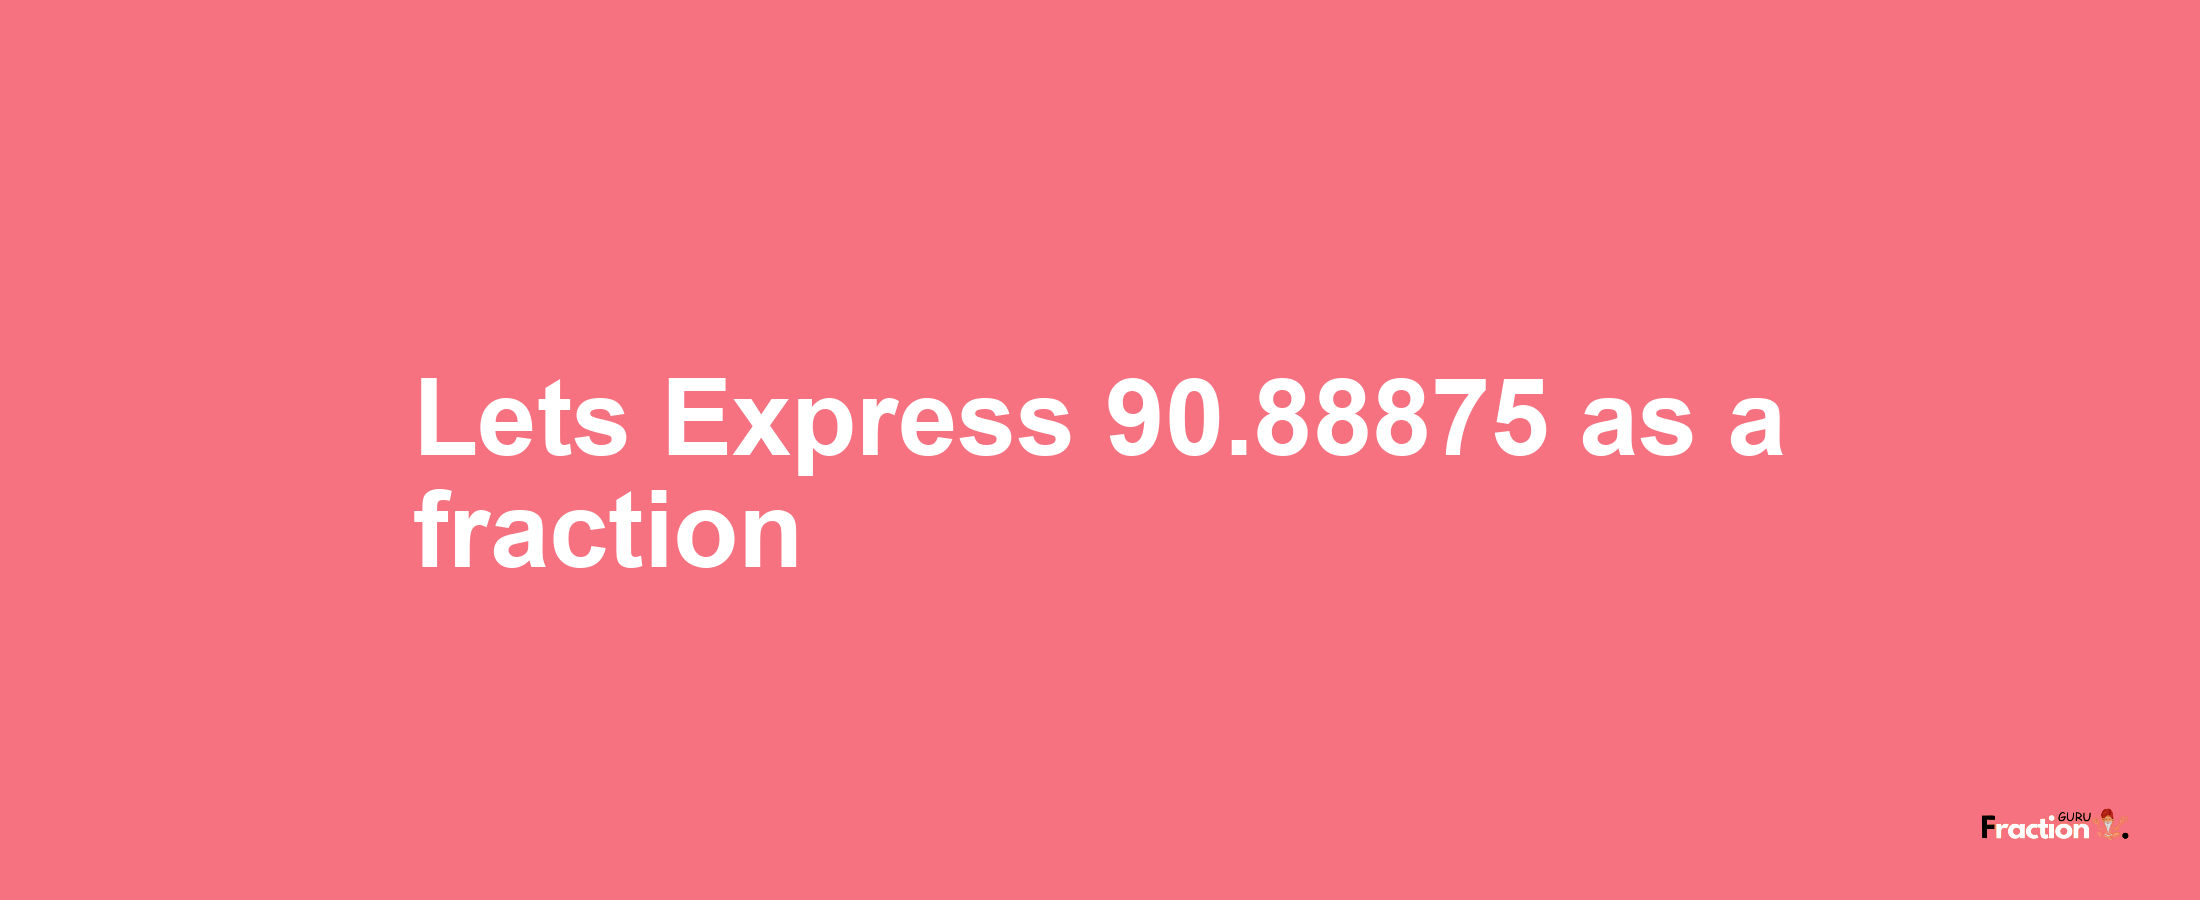 Lets Express 90.88875 as afraction